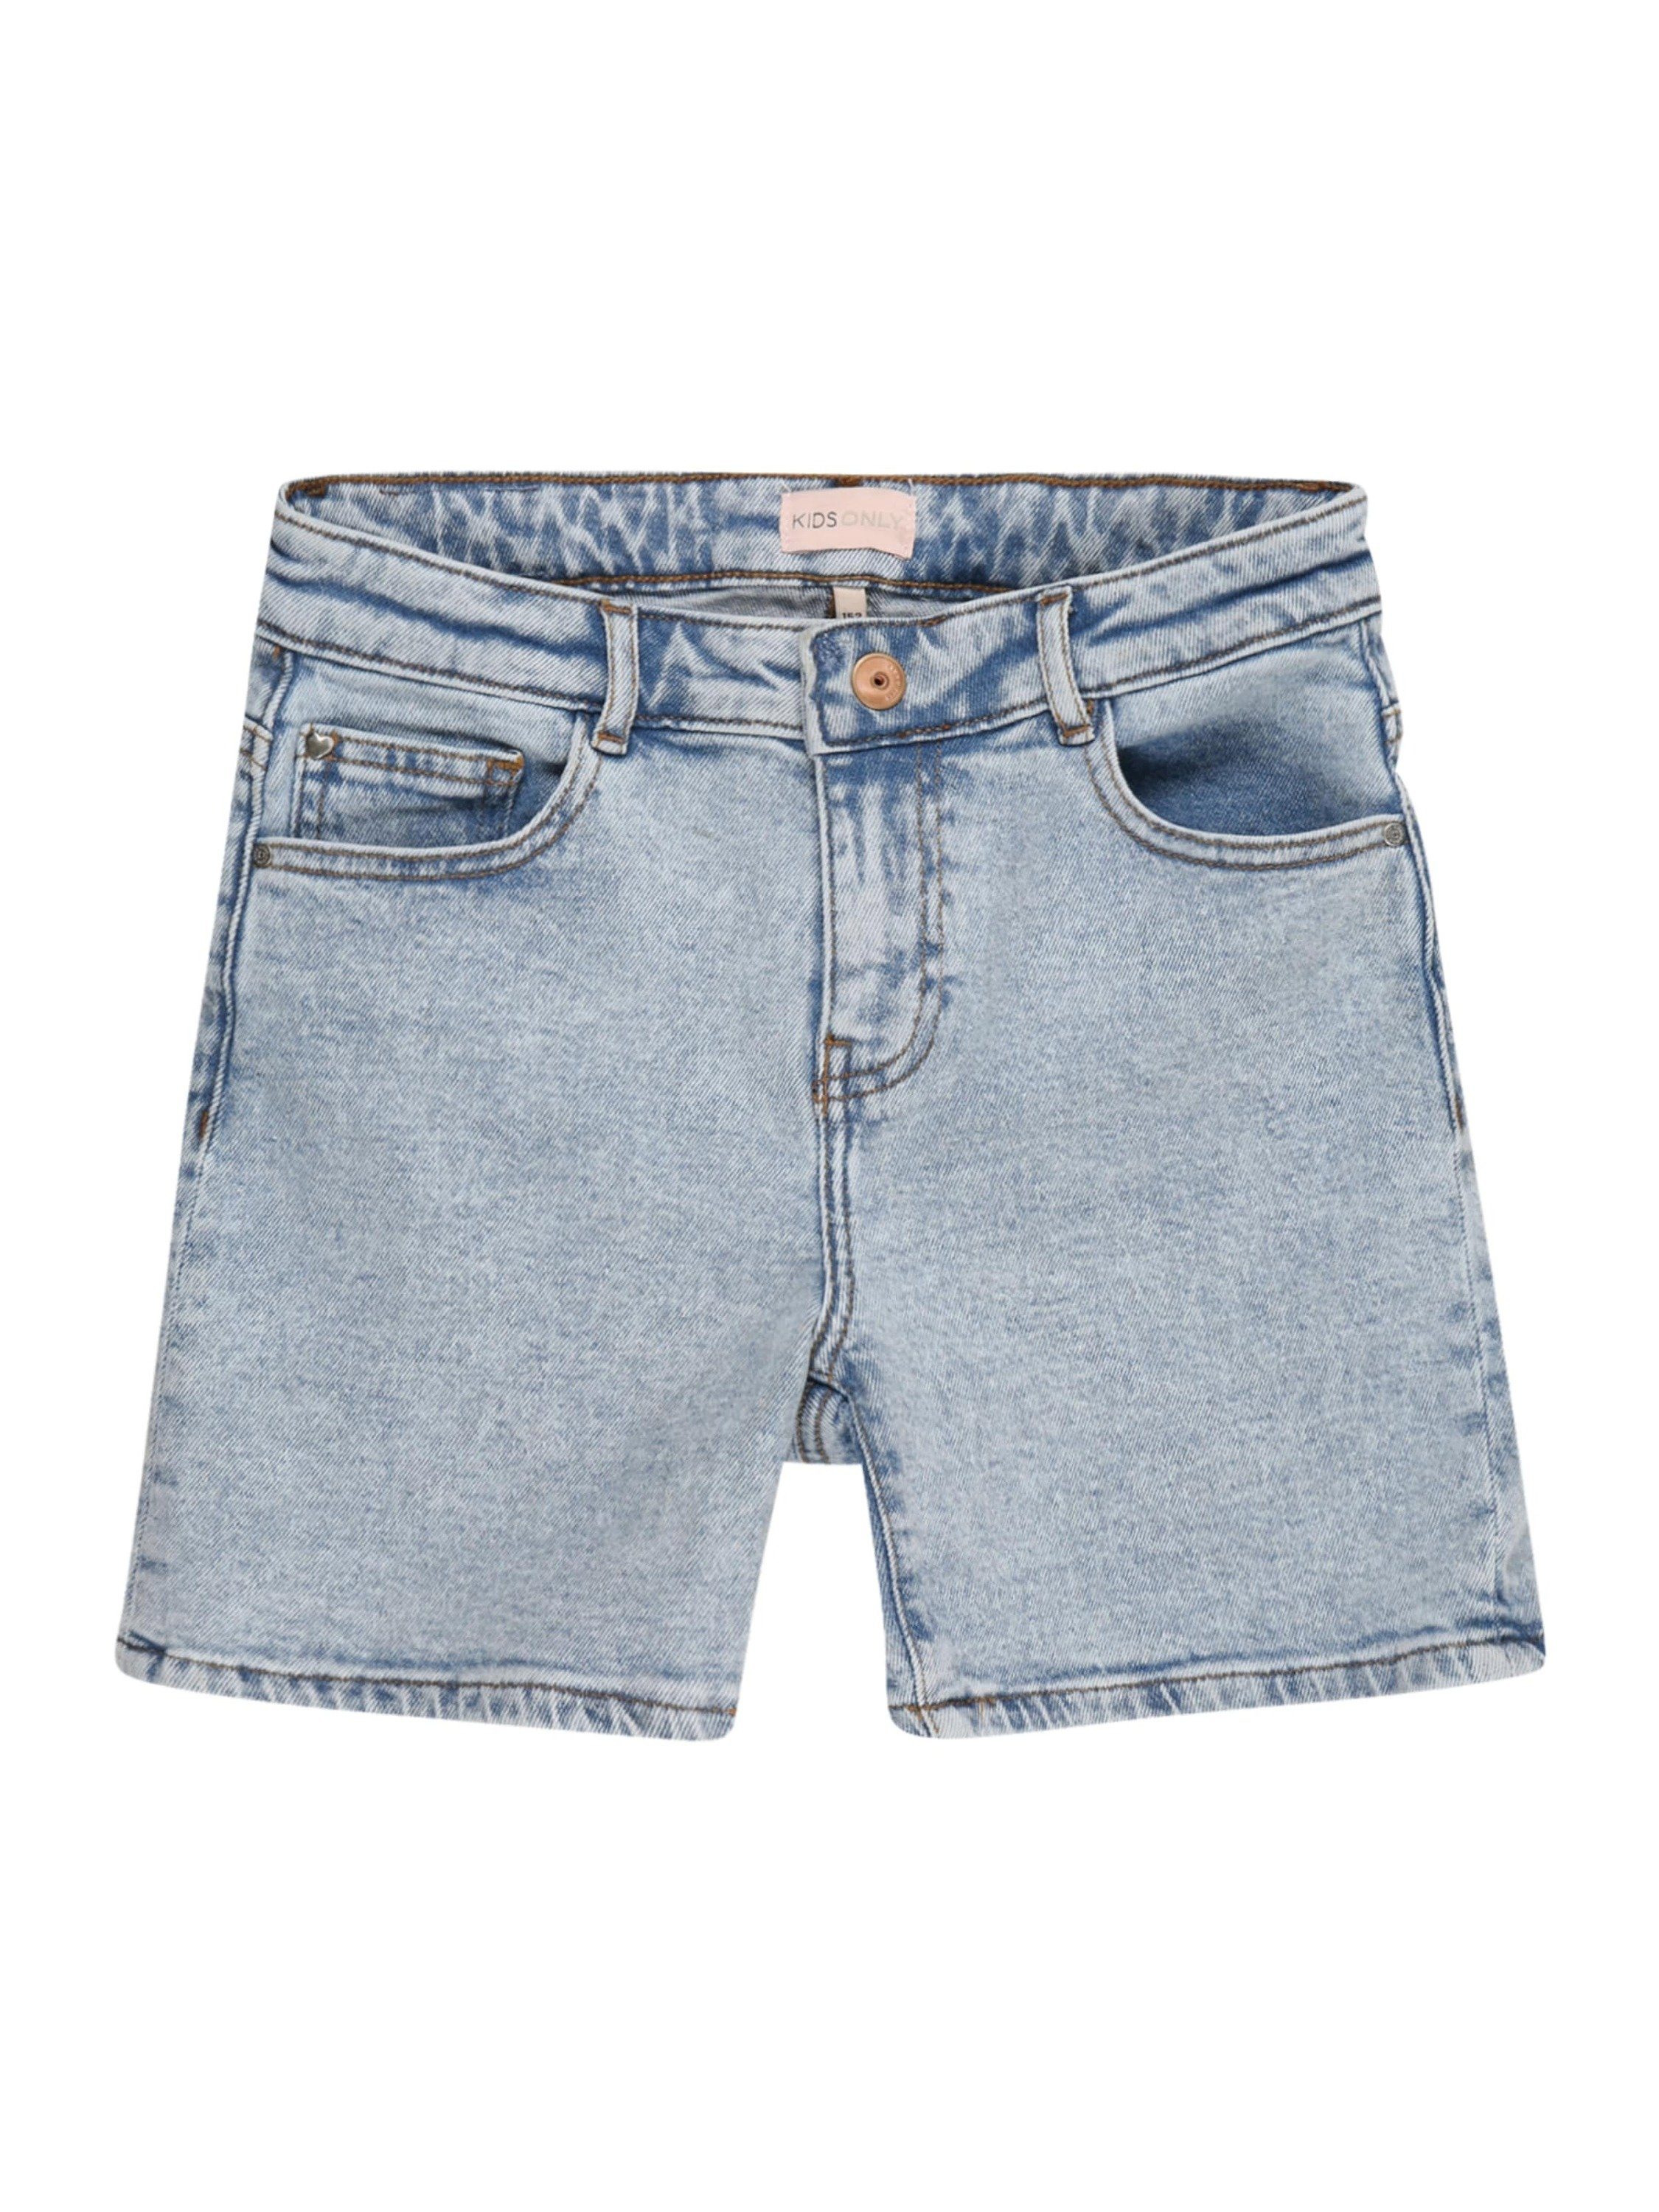 Label KIDS Jeansshorts Flag KONPHINE, ONLY Patch/Label